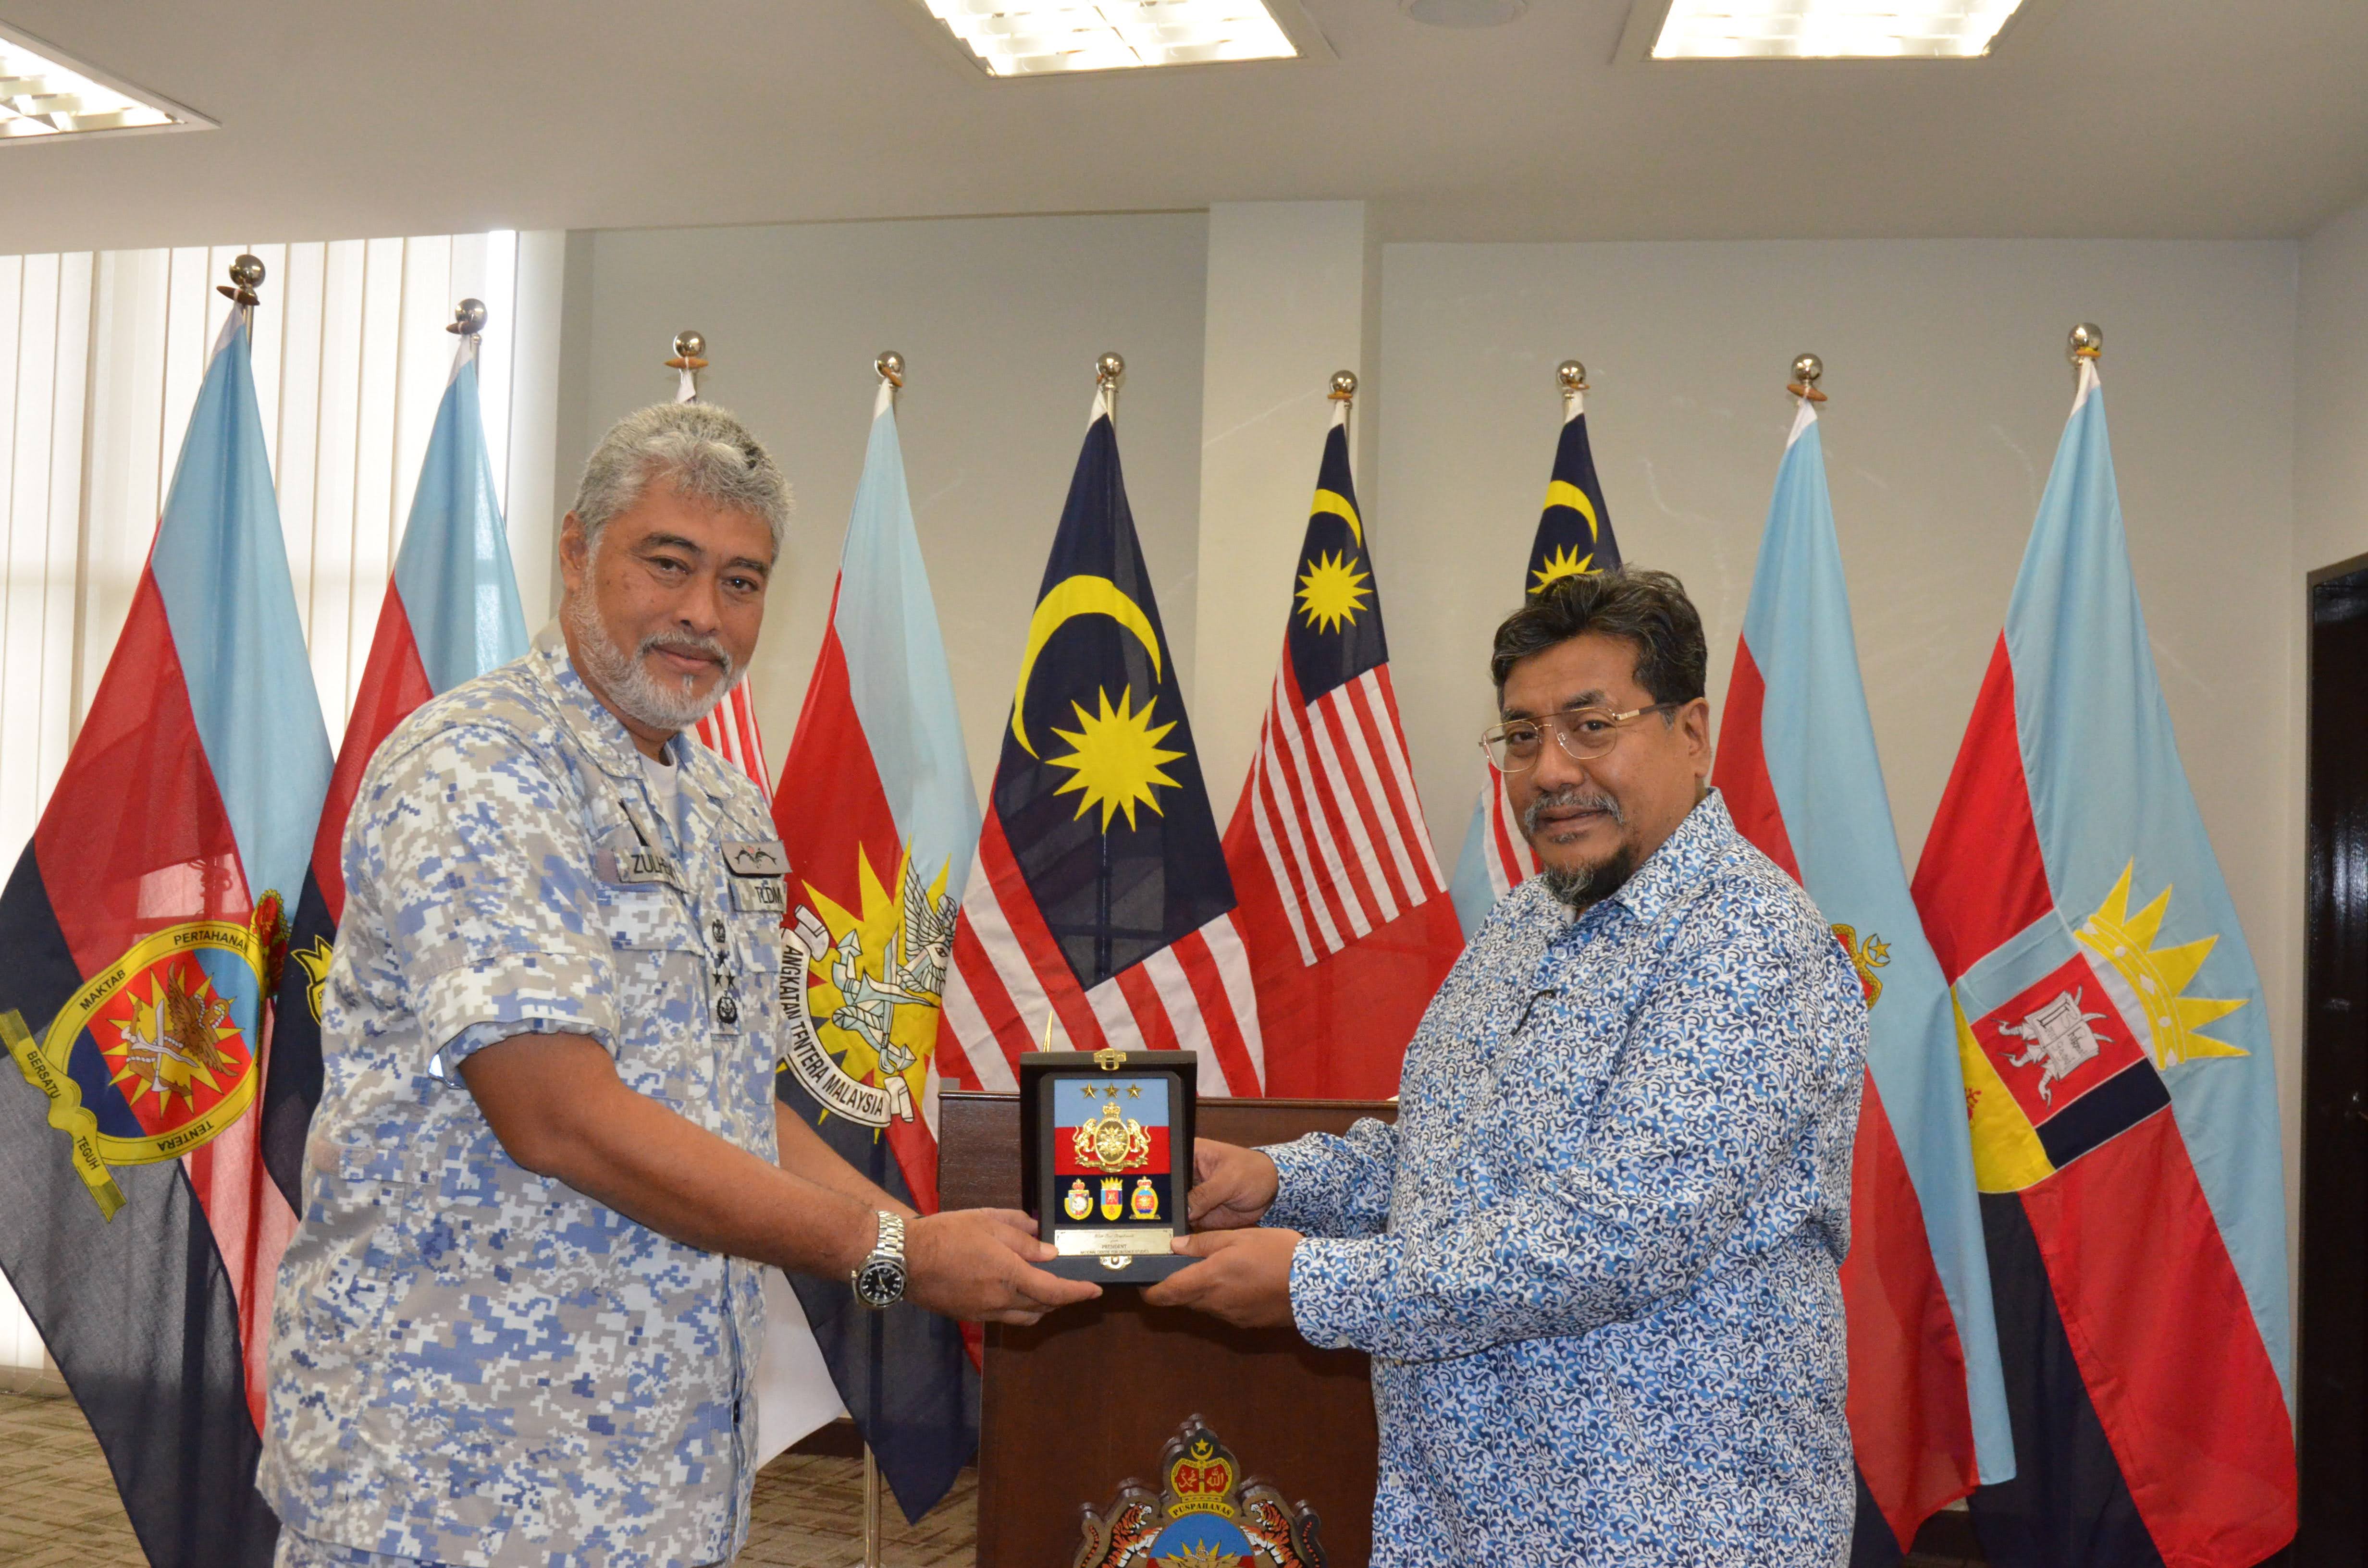 Courtesy Call to YBhg Vice Admiral Dato' Zulhelmy bin Ithnain, President of the National Centre for Defence Studies(PUSPAHANAS)